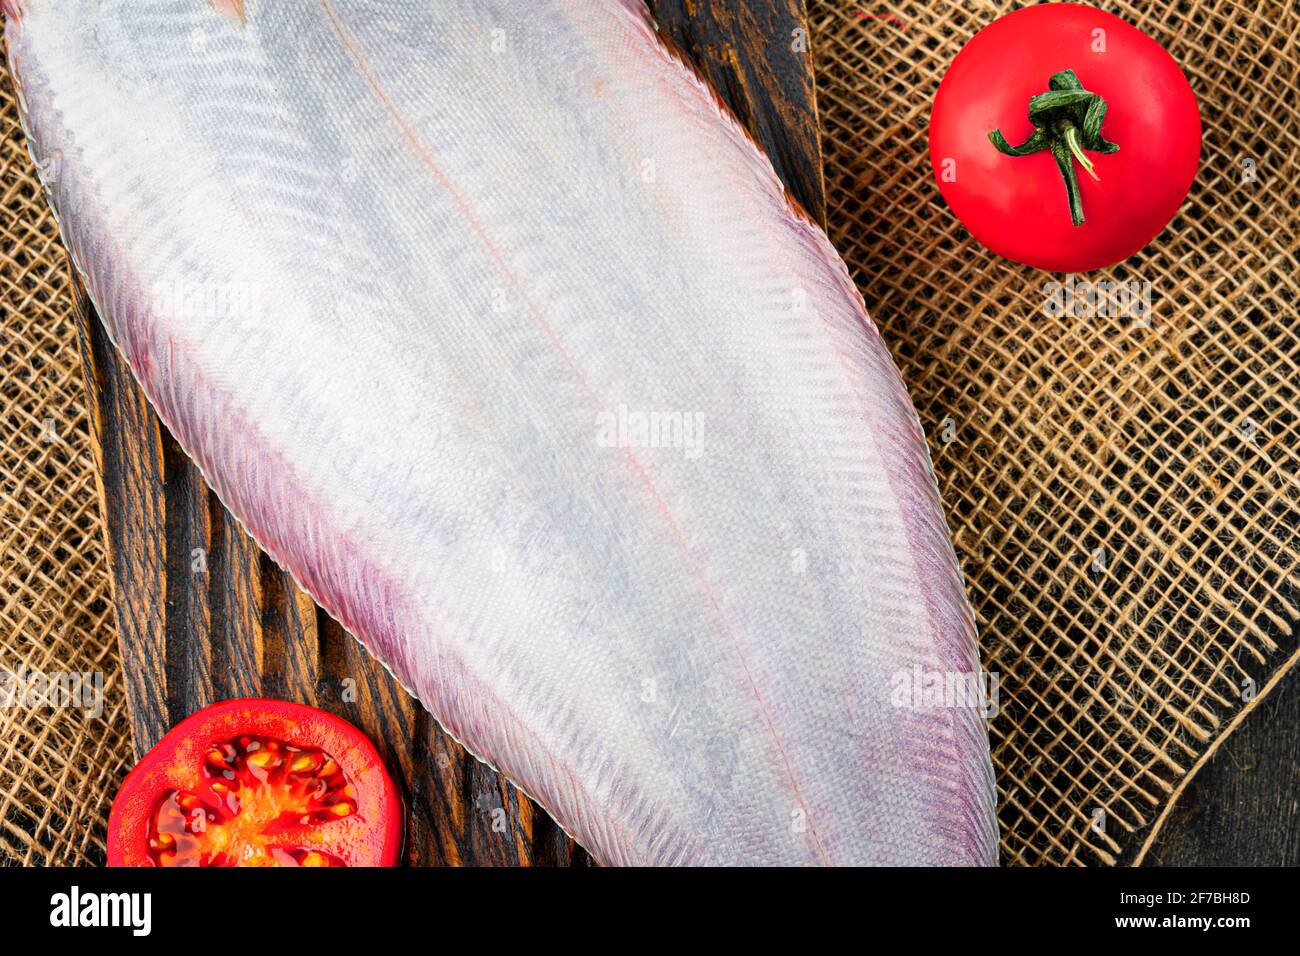 Raw fresh sole fish with tomatoes on a wooden cutting board. White belly of a fish Stock Photo